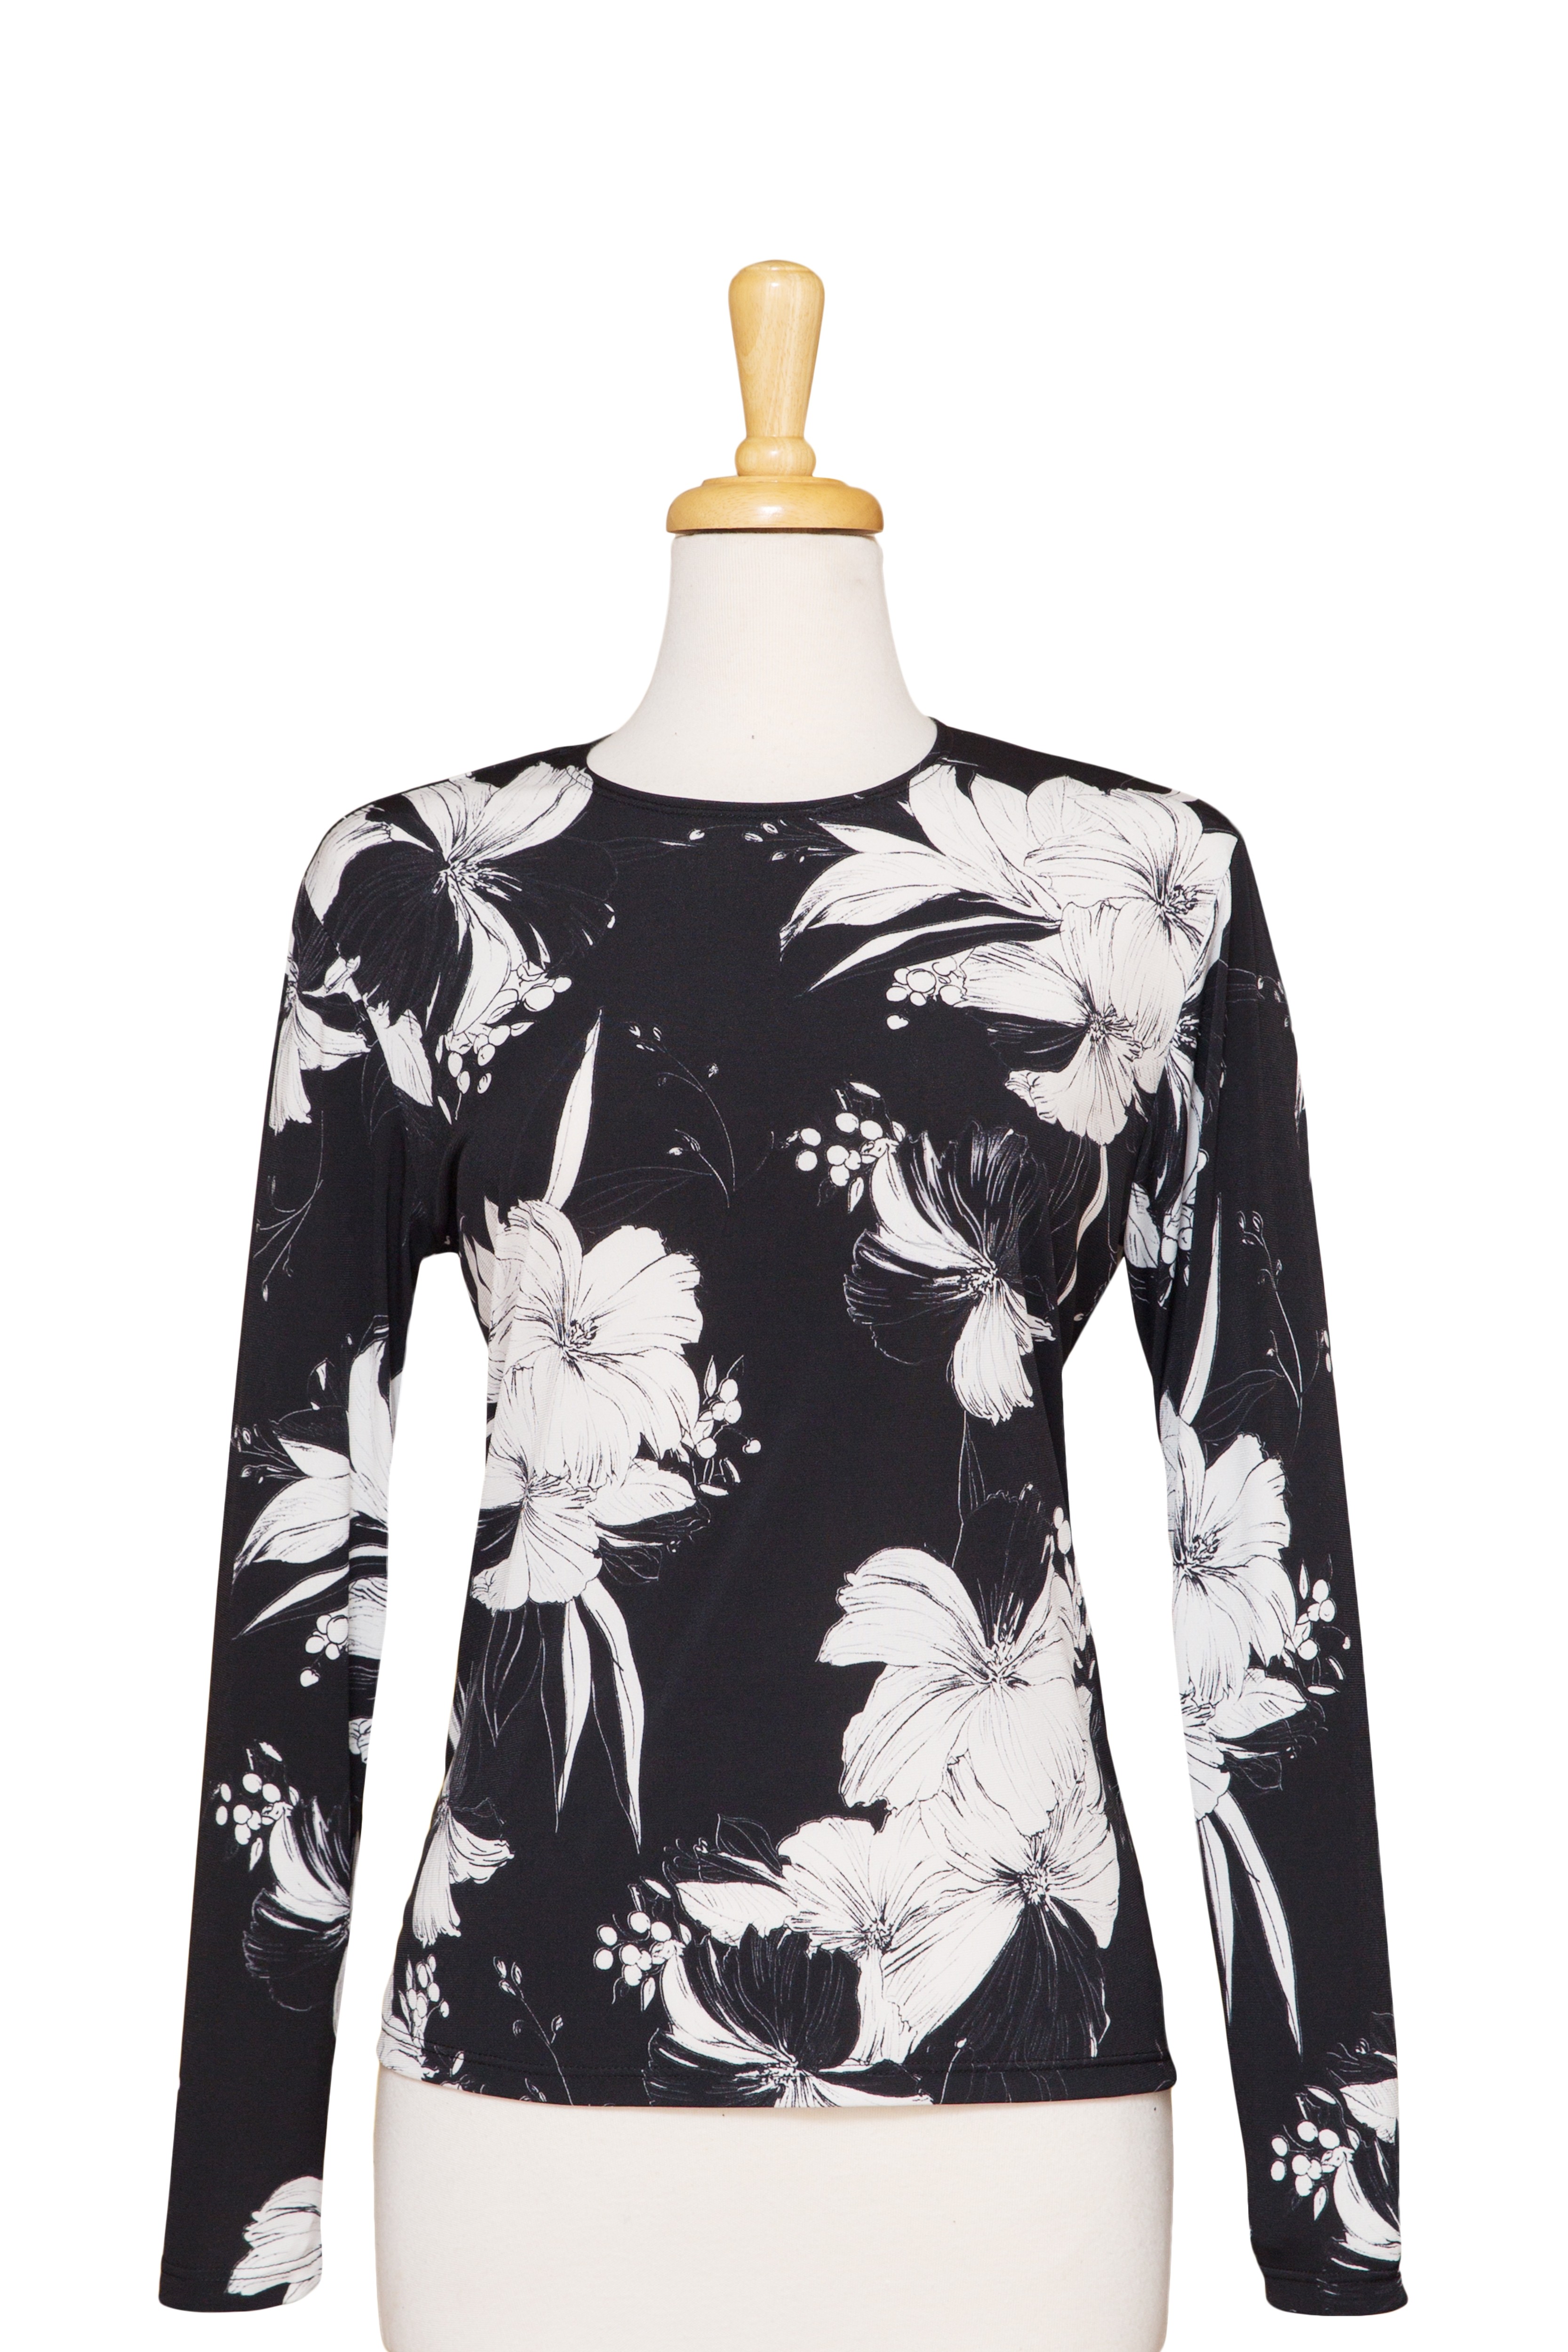 Plus Size Black And White Floral Microfiber Long Sleeve Top 